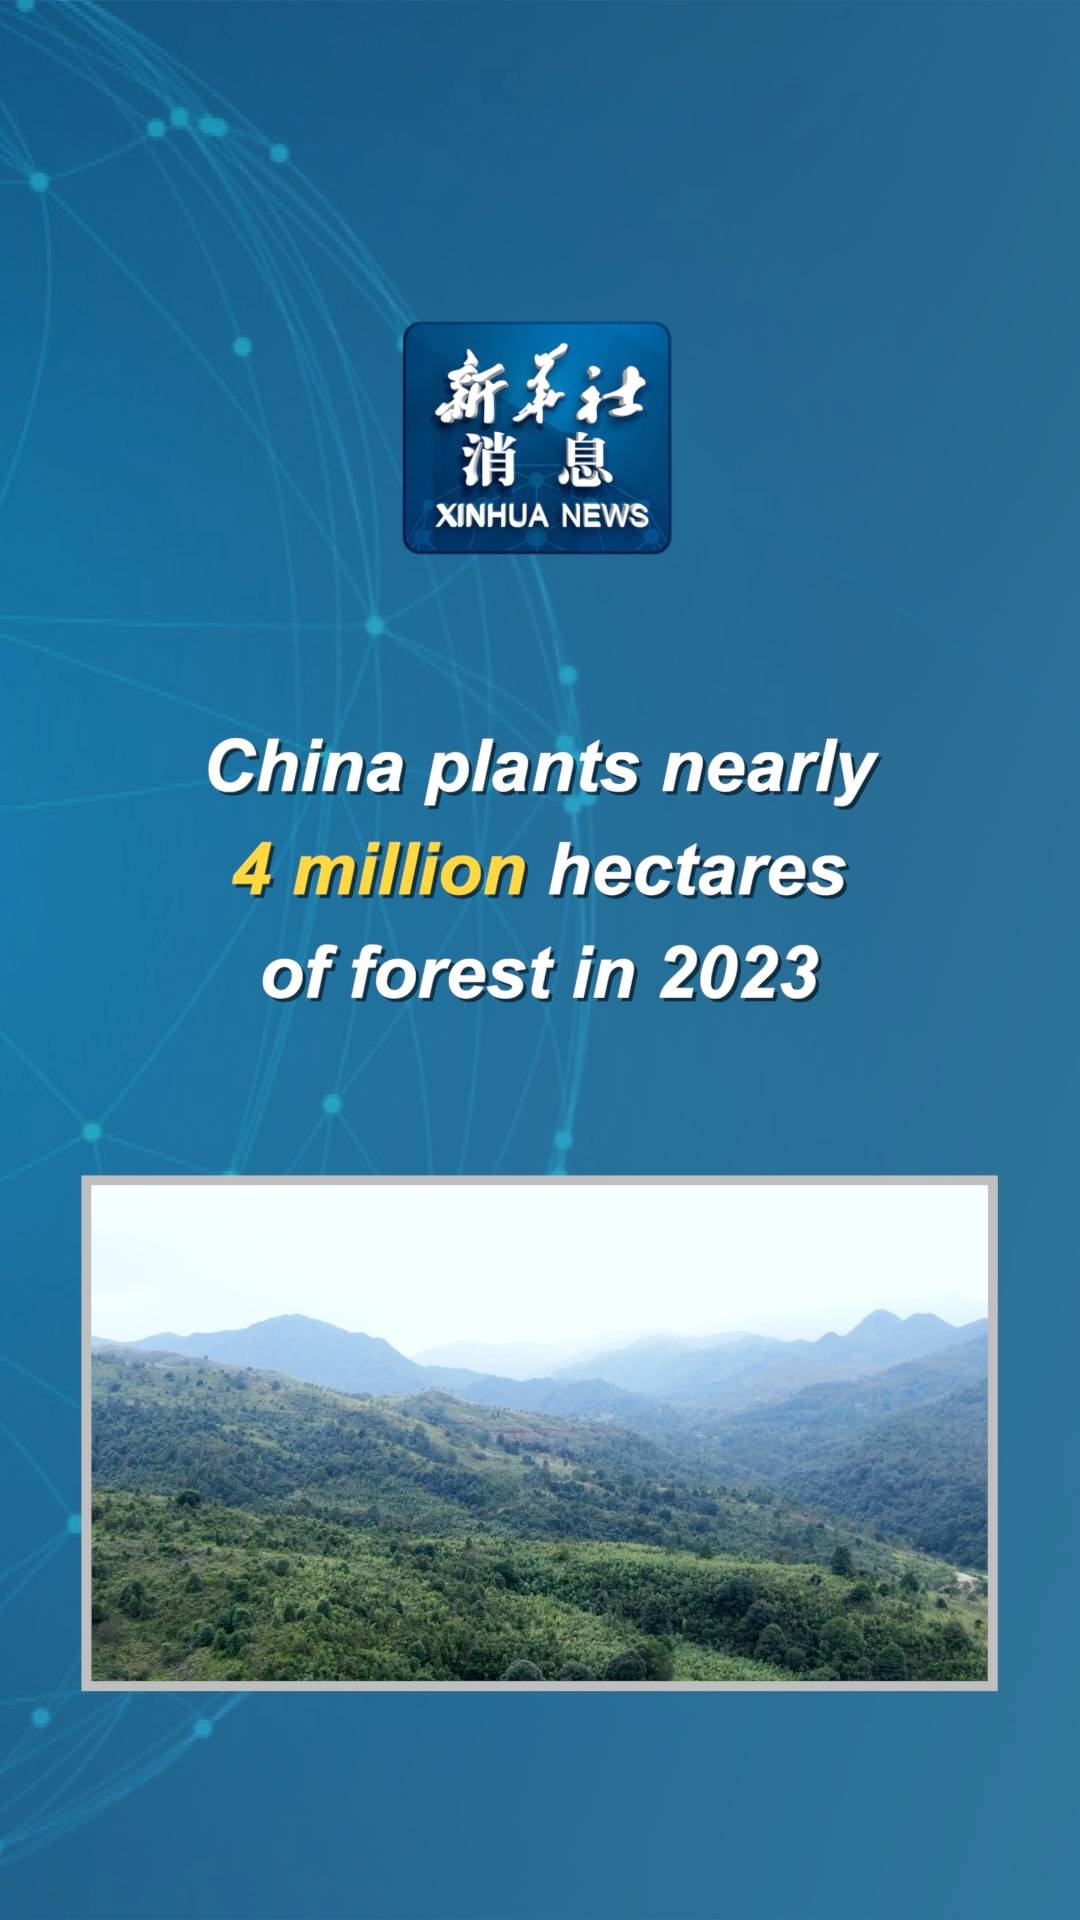 Xinhua News | China plants nearly 4 million hectares of forest in